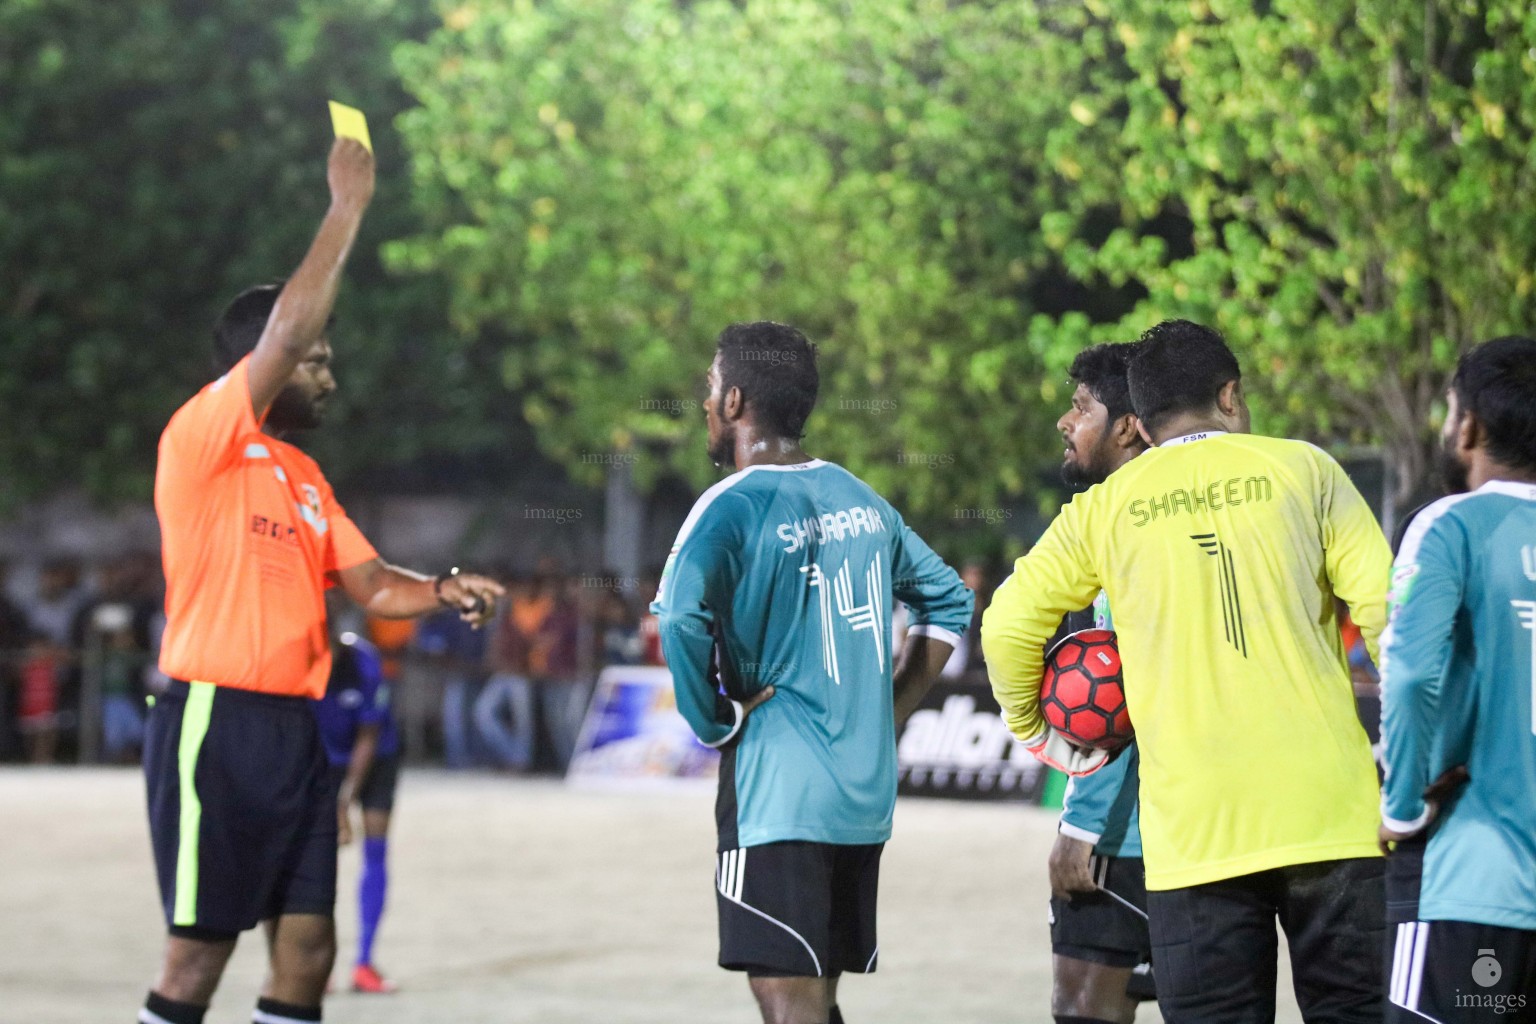 Milo Club Maldives Cup opening ceremony and opening matches in Male', Maldives, Thursday, March. 24, 2016. (Images.mv Photo/ Hussain Sinan).